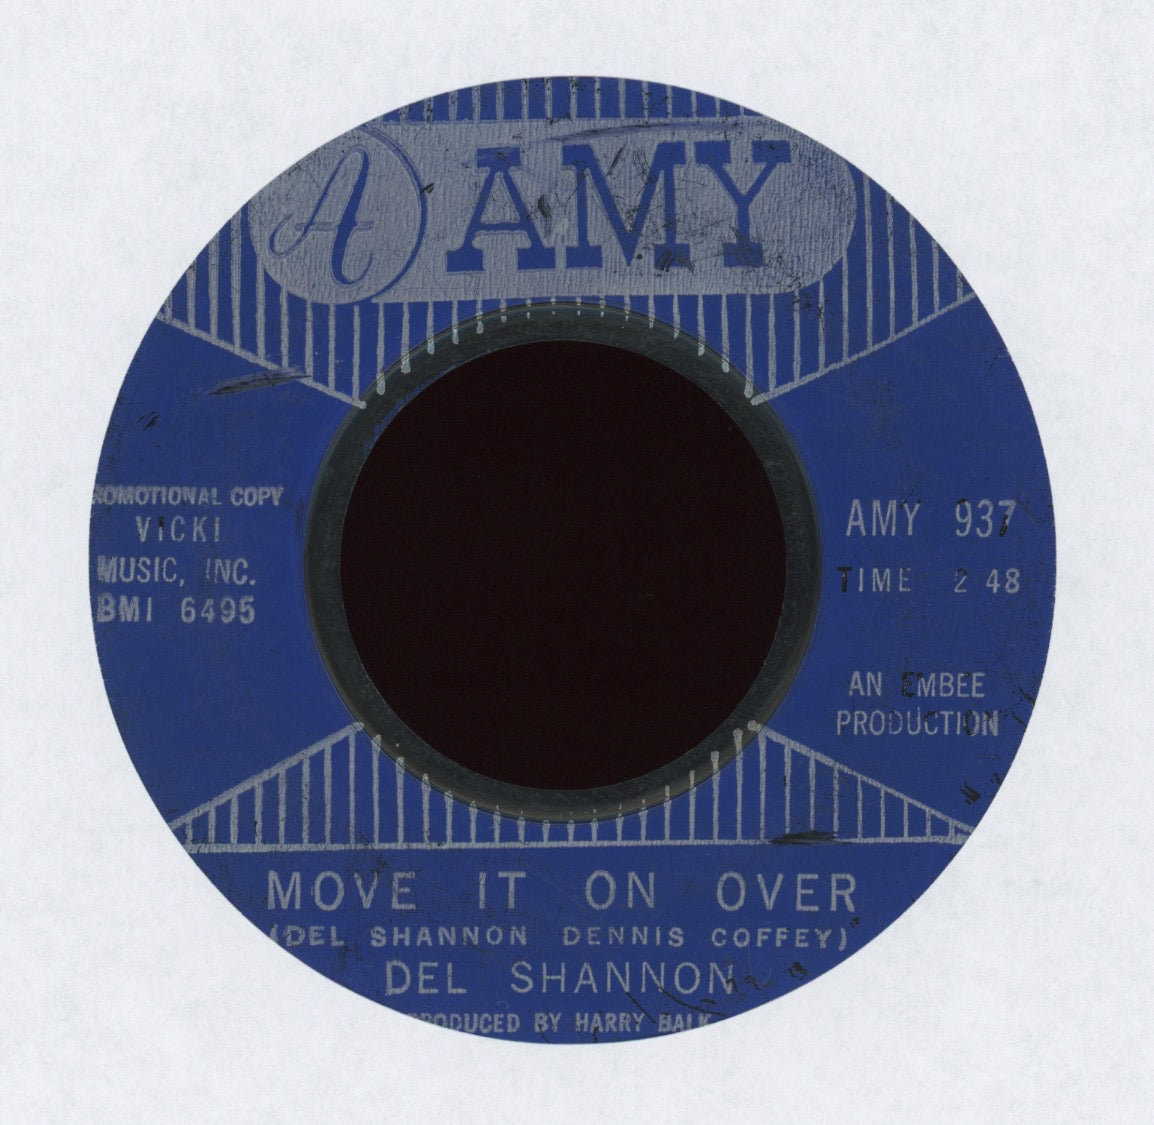 Del Shannon - Move It On Over on Amy